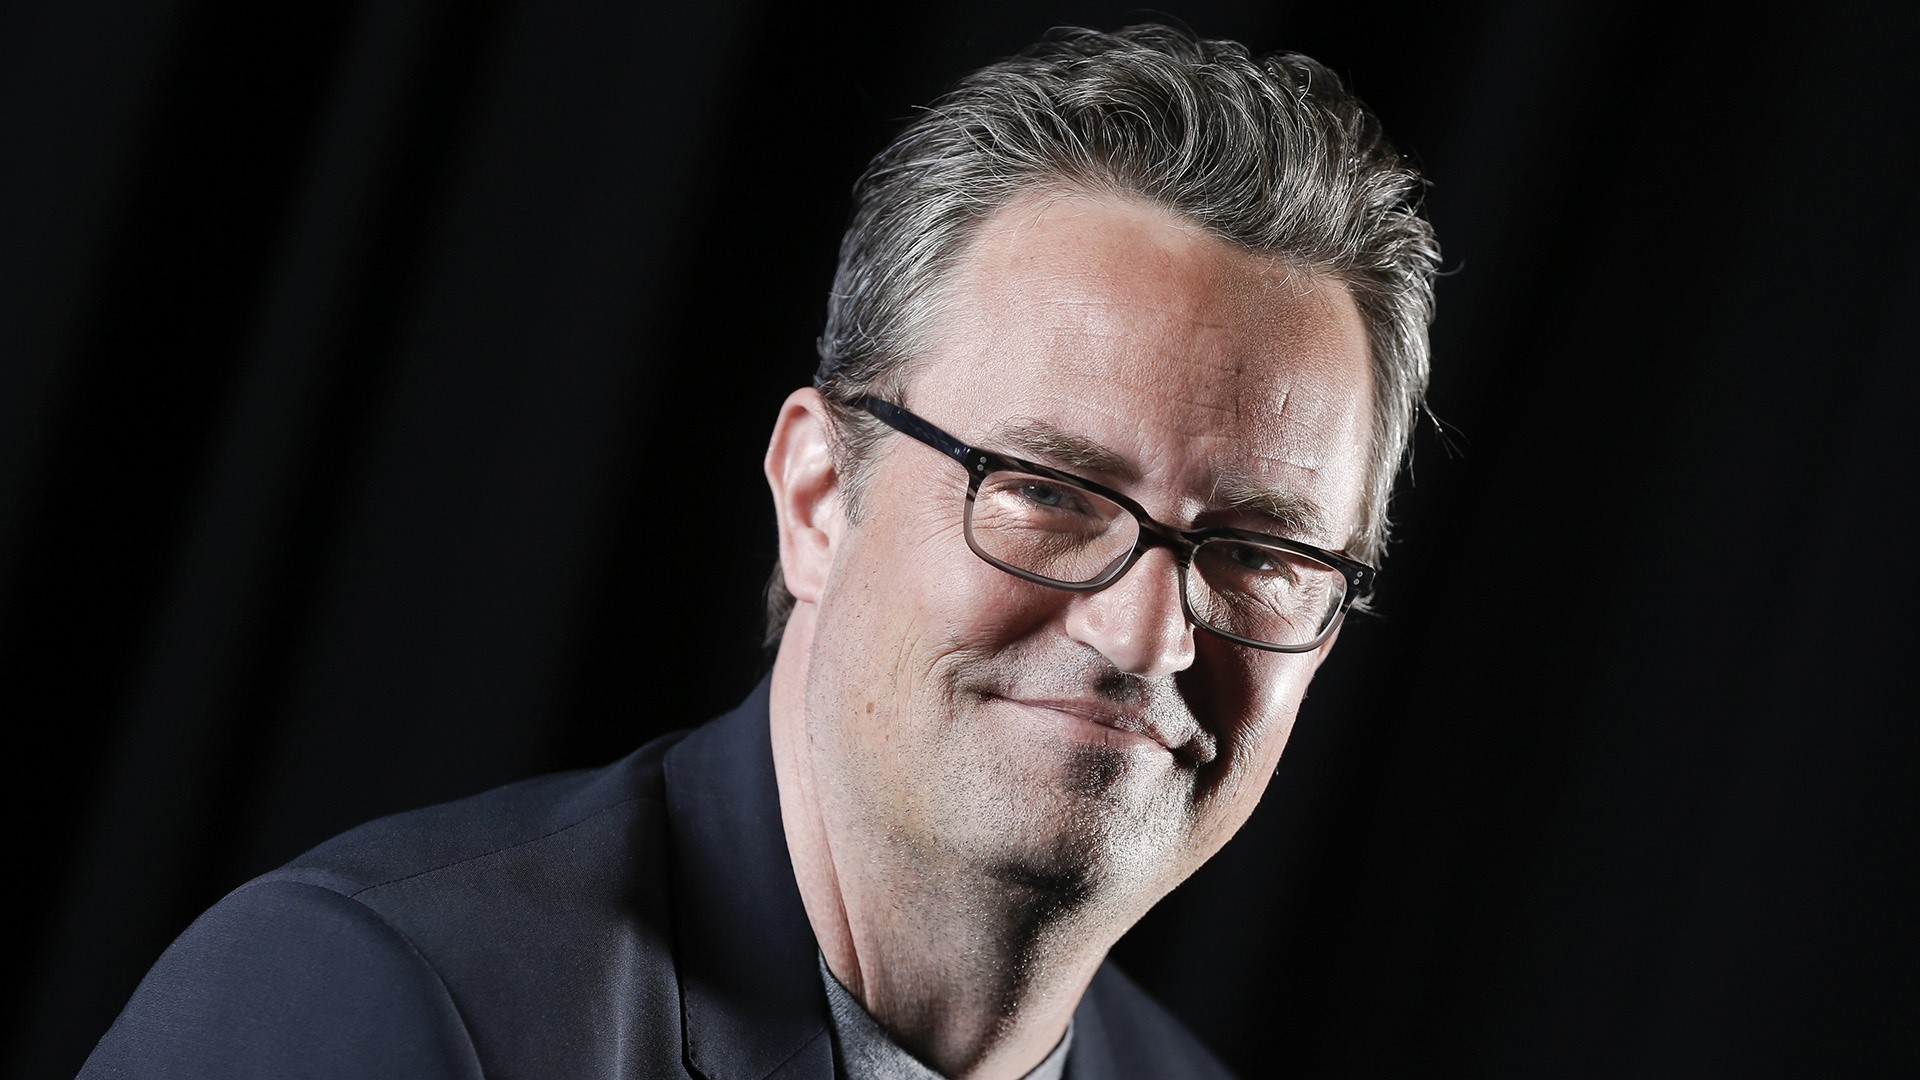 Level of ketamine in Matthew Perry's blood sparks investigation